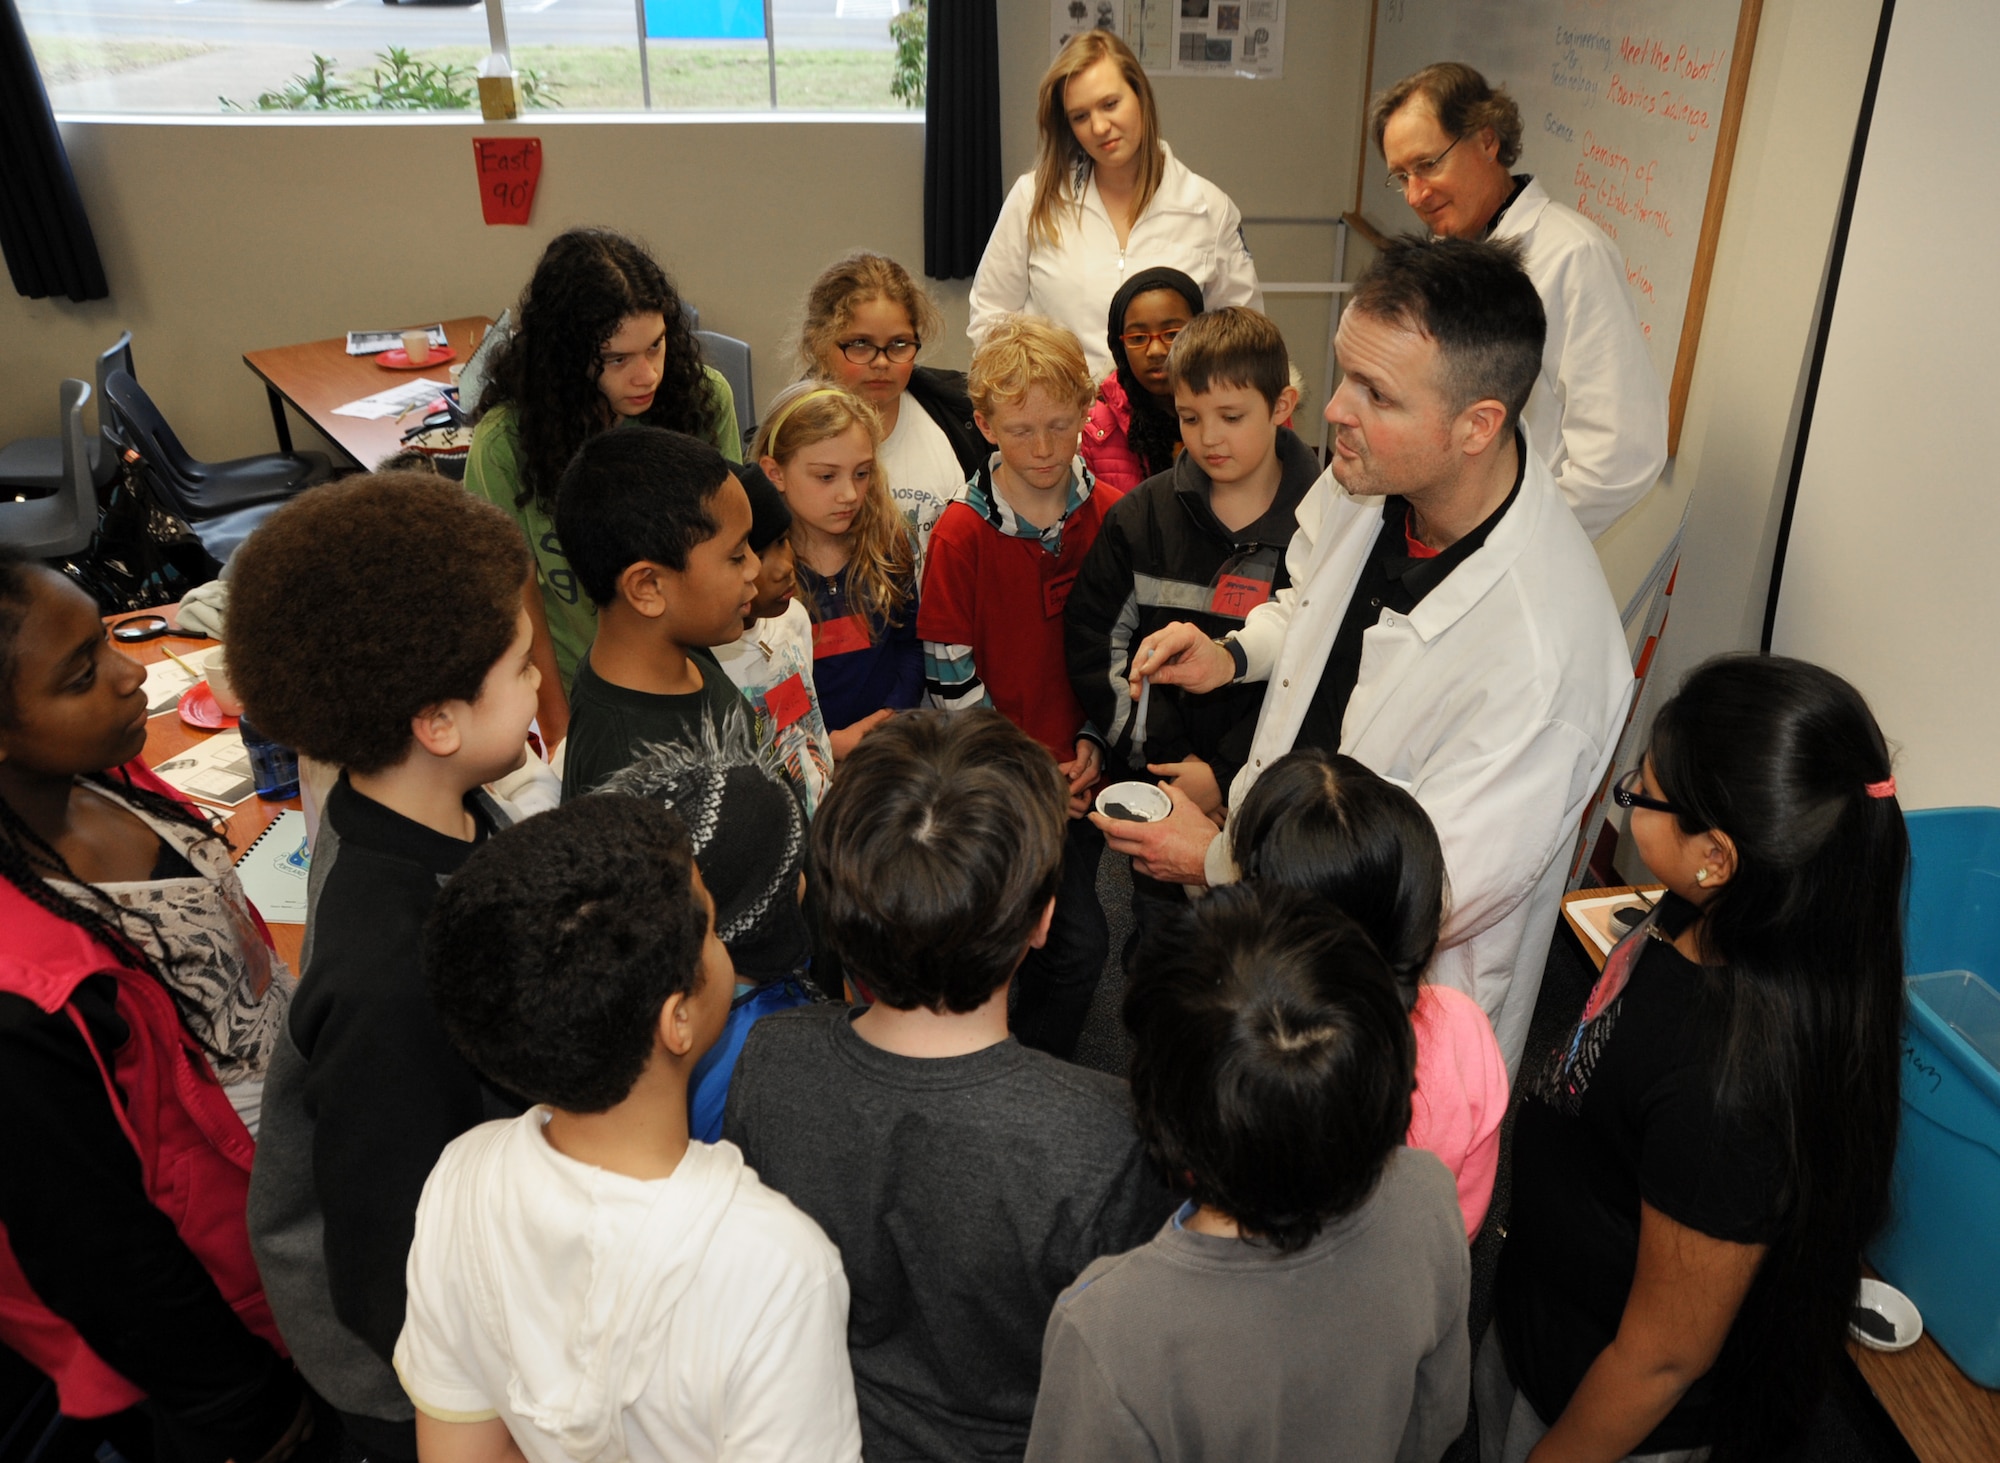 Jon Dyer, a State of Oregon Forensic Scientist, gives detailed instructions on a finger print experiment to a student group from Chief Joseph-Ockley Green Elementary School in Portland, Ore., Dec. 16, 2013. STARBASE Academies help teach more than 75,000 students nationally each year in math and science education. (Air National Guard photo by Tech. Sgt. John Hughel, 142nd Fighter Wing Public Affairs/Released)